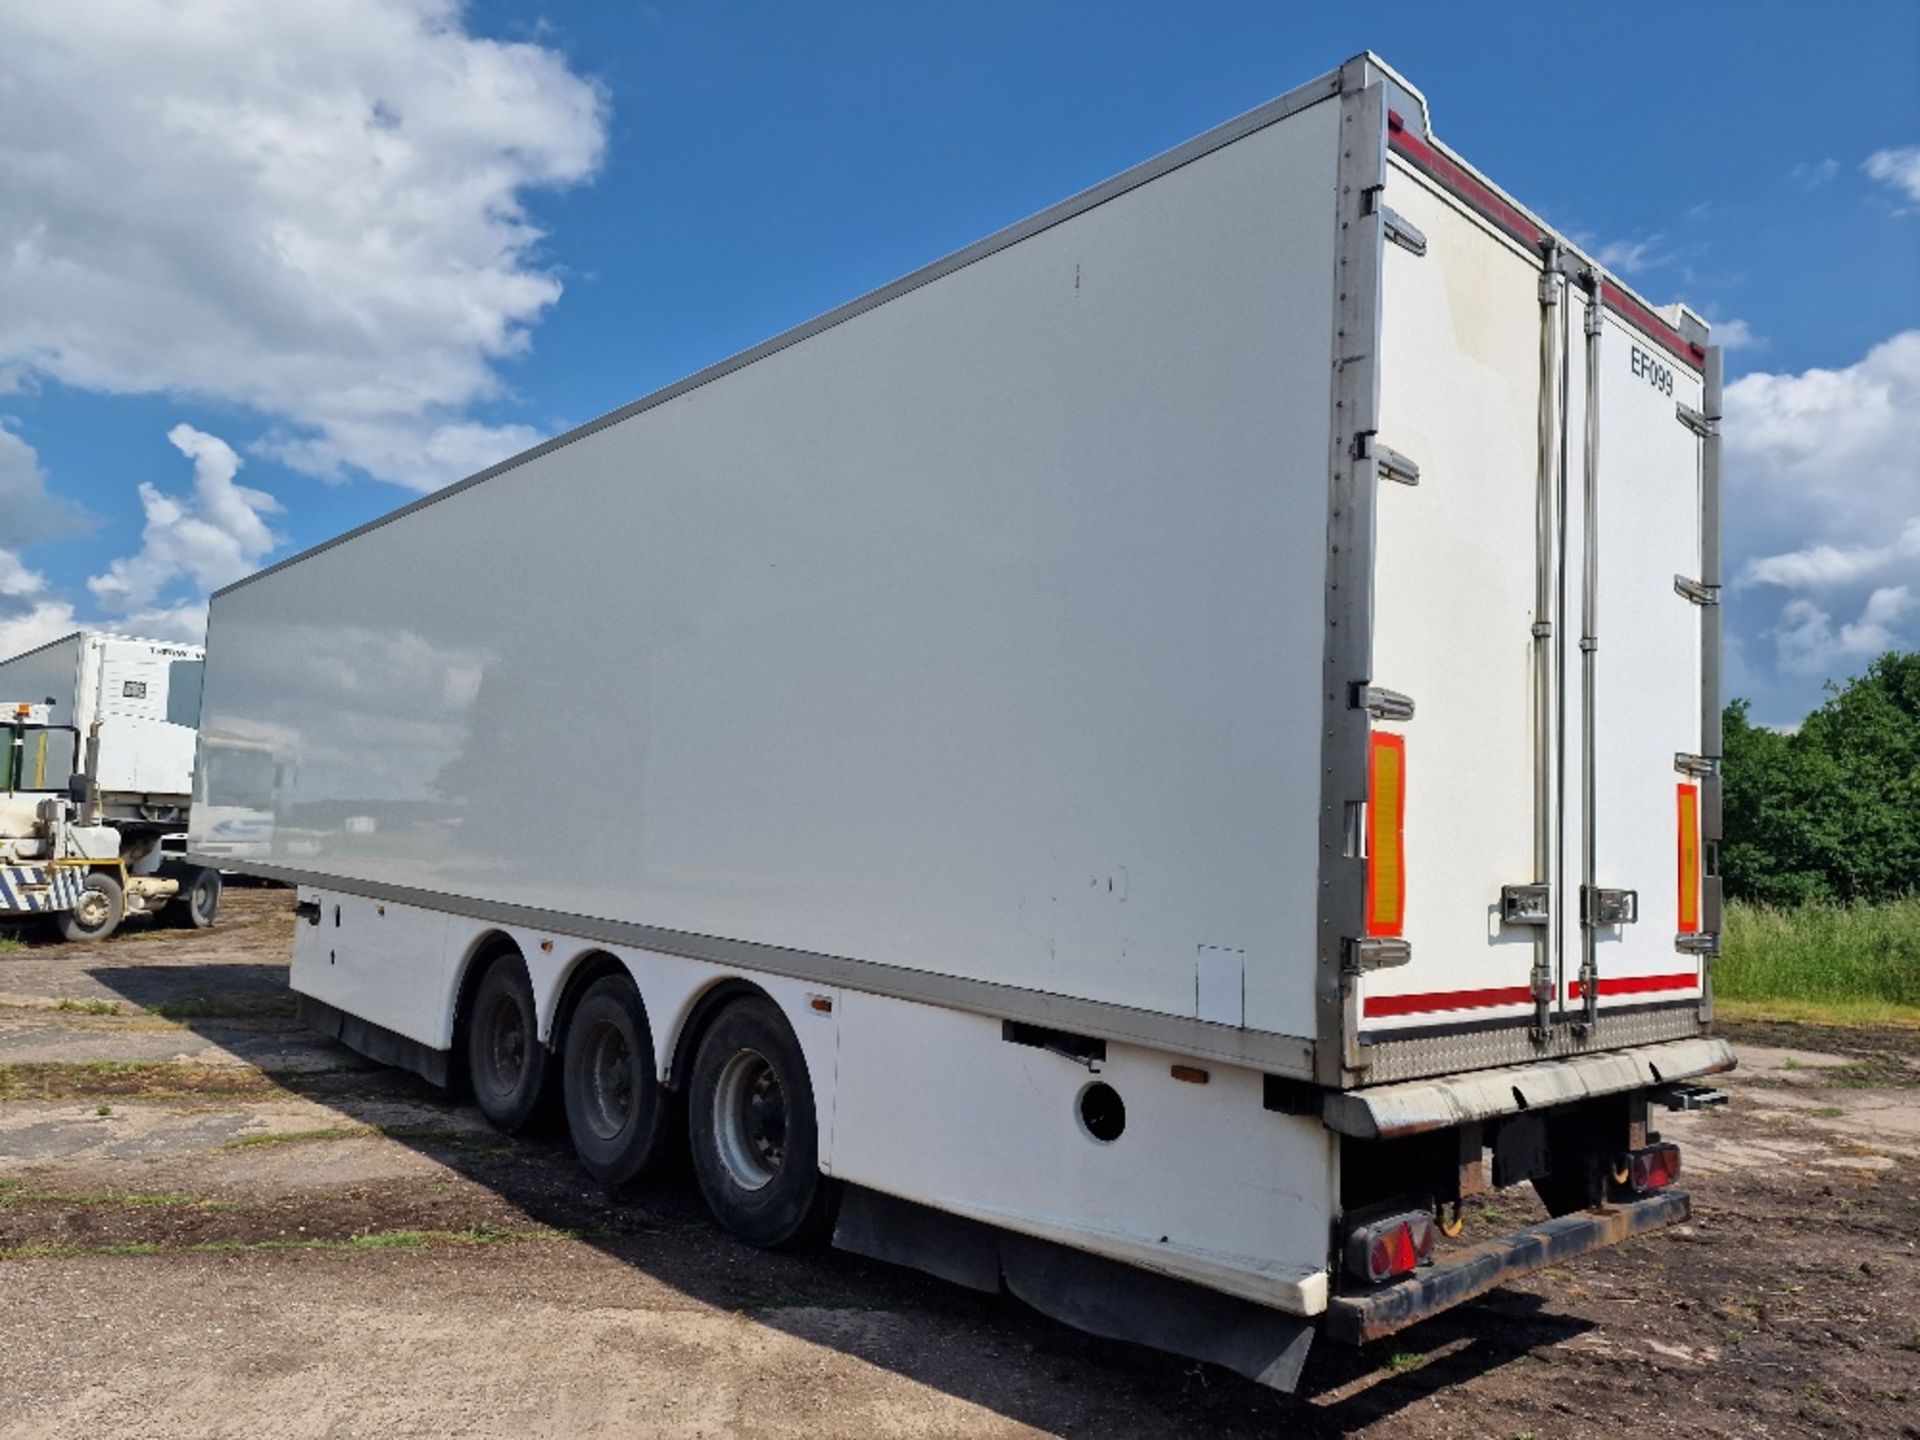 EF099 - 2009 Montracon 13.6m Tri-Axle Refrigerated Trailer - Image 8 of 21